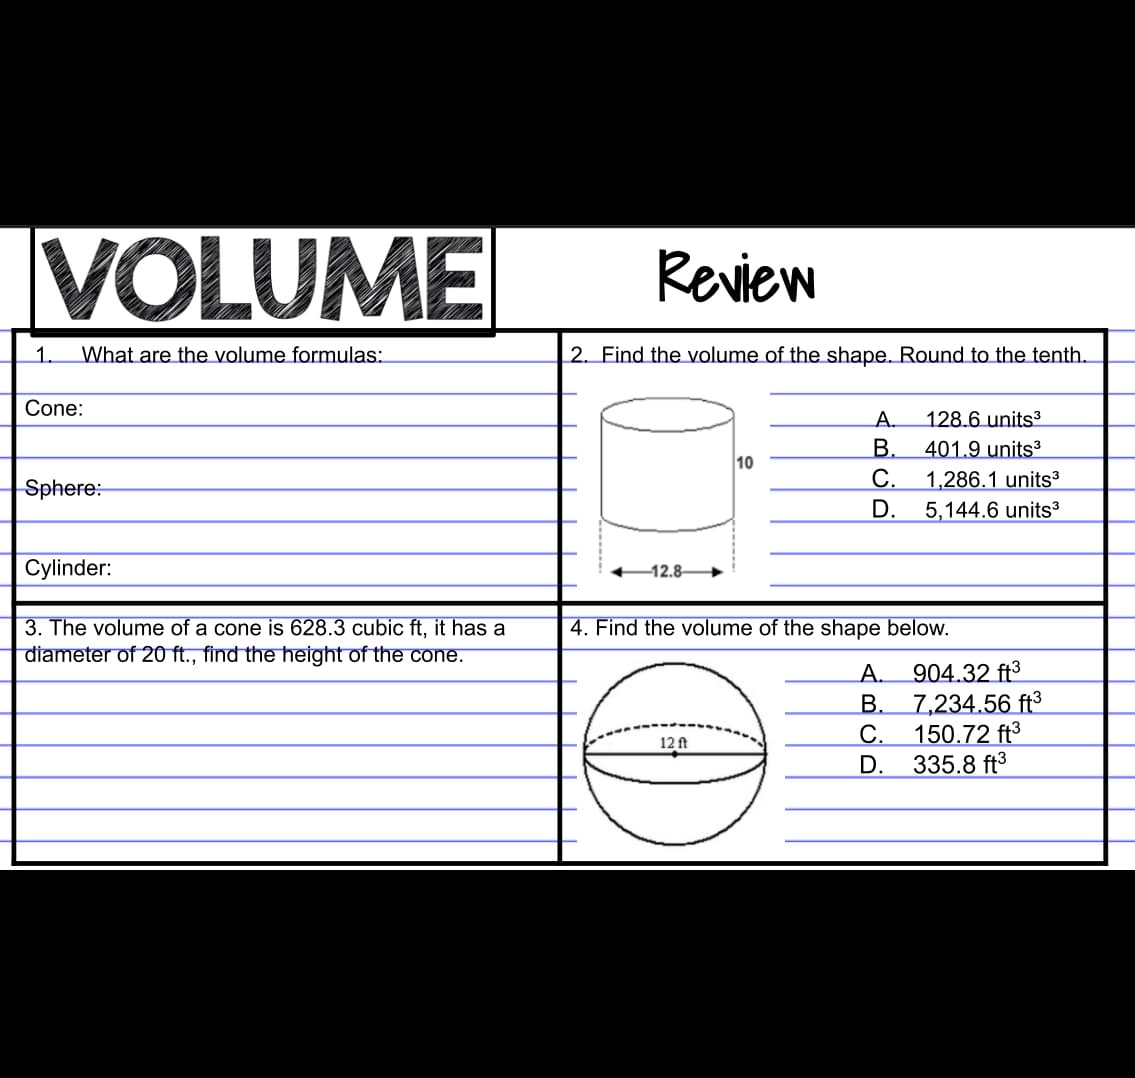 VOLUME
Review
1.
What are the volume formulas:
2. Find the volume of the shape. Round to the tenth.
Cone:
A.
128.6 units3
В.
401.9 units³
С.
1,286.1 units³
D.
Sphere:
5,144.6 units3
Cylinder:
-12.8
4. Find the volume of the shape below.
3. The volume of a cone is 628.3 cubic ft, it has a
diameter of 20 ft., find the height of the cone.
904.32 ft3
B.
7,234.56 ft³
С.
150.72 ft3
335.8 ft3
А.
12 ft
D.
